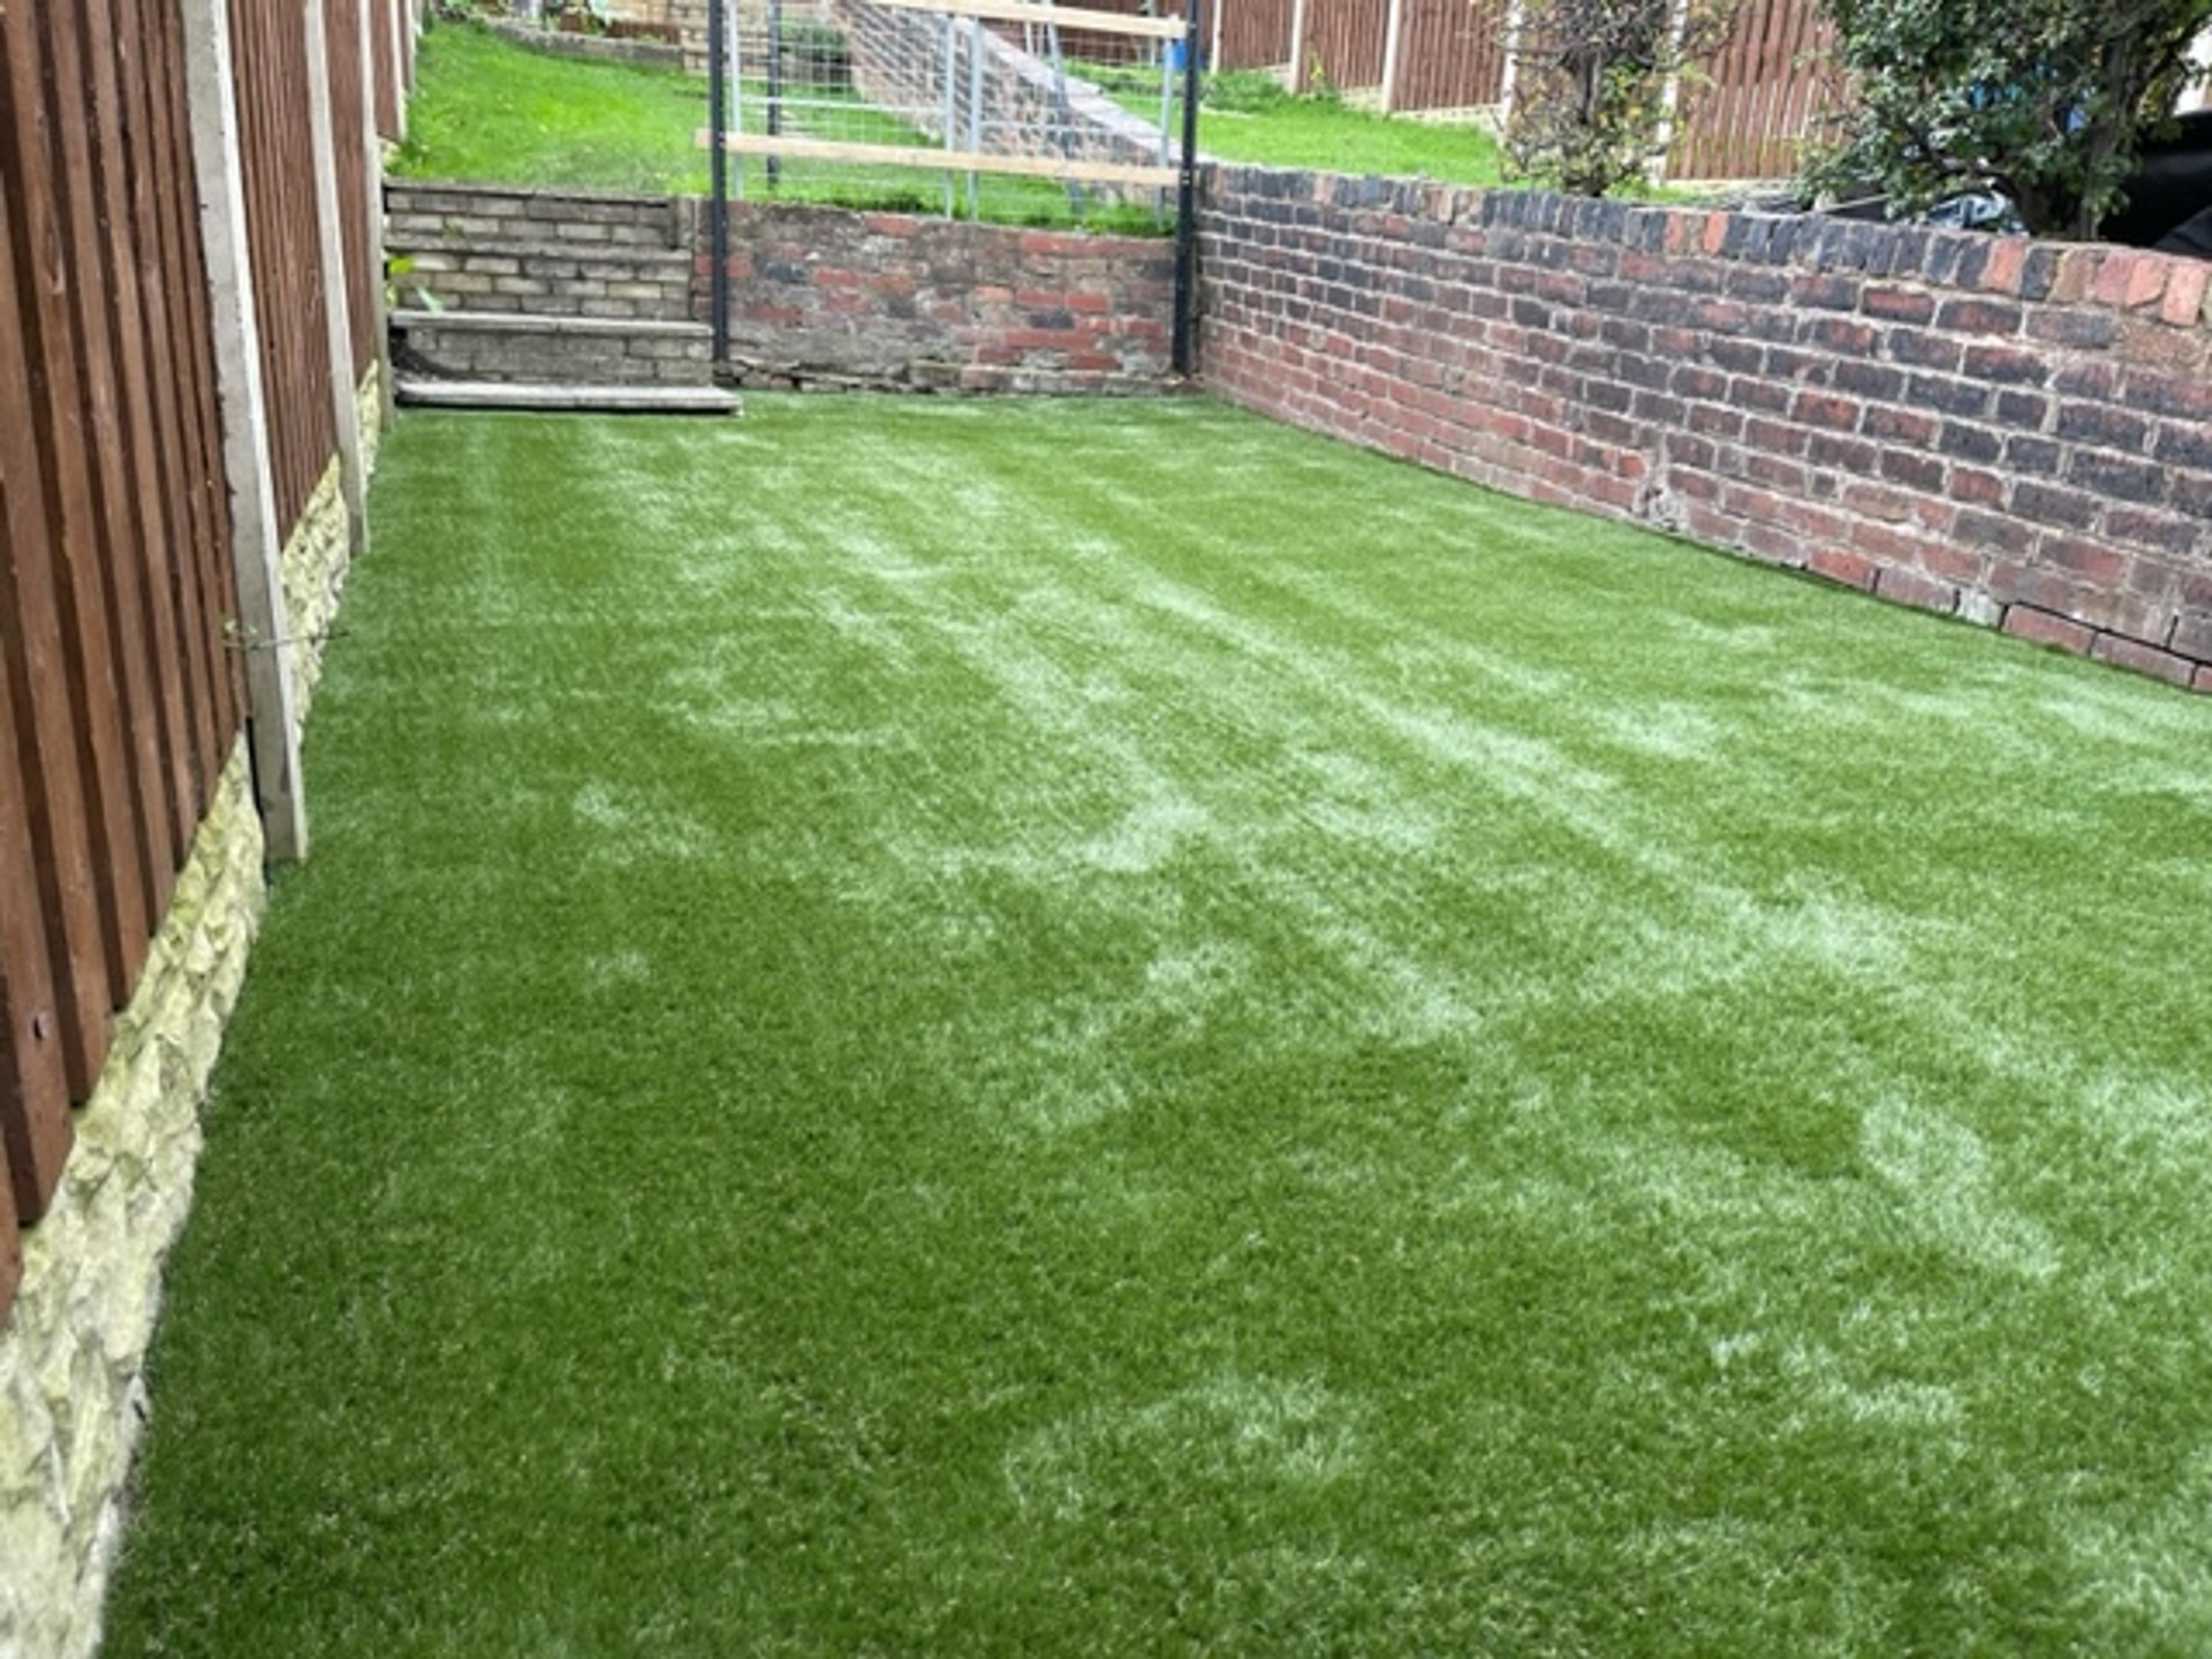 Artificial grass install Burngreave, S4, South Yorkshire